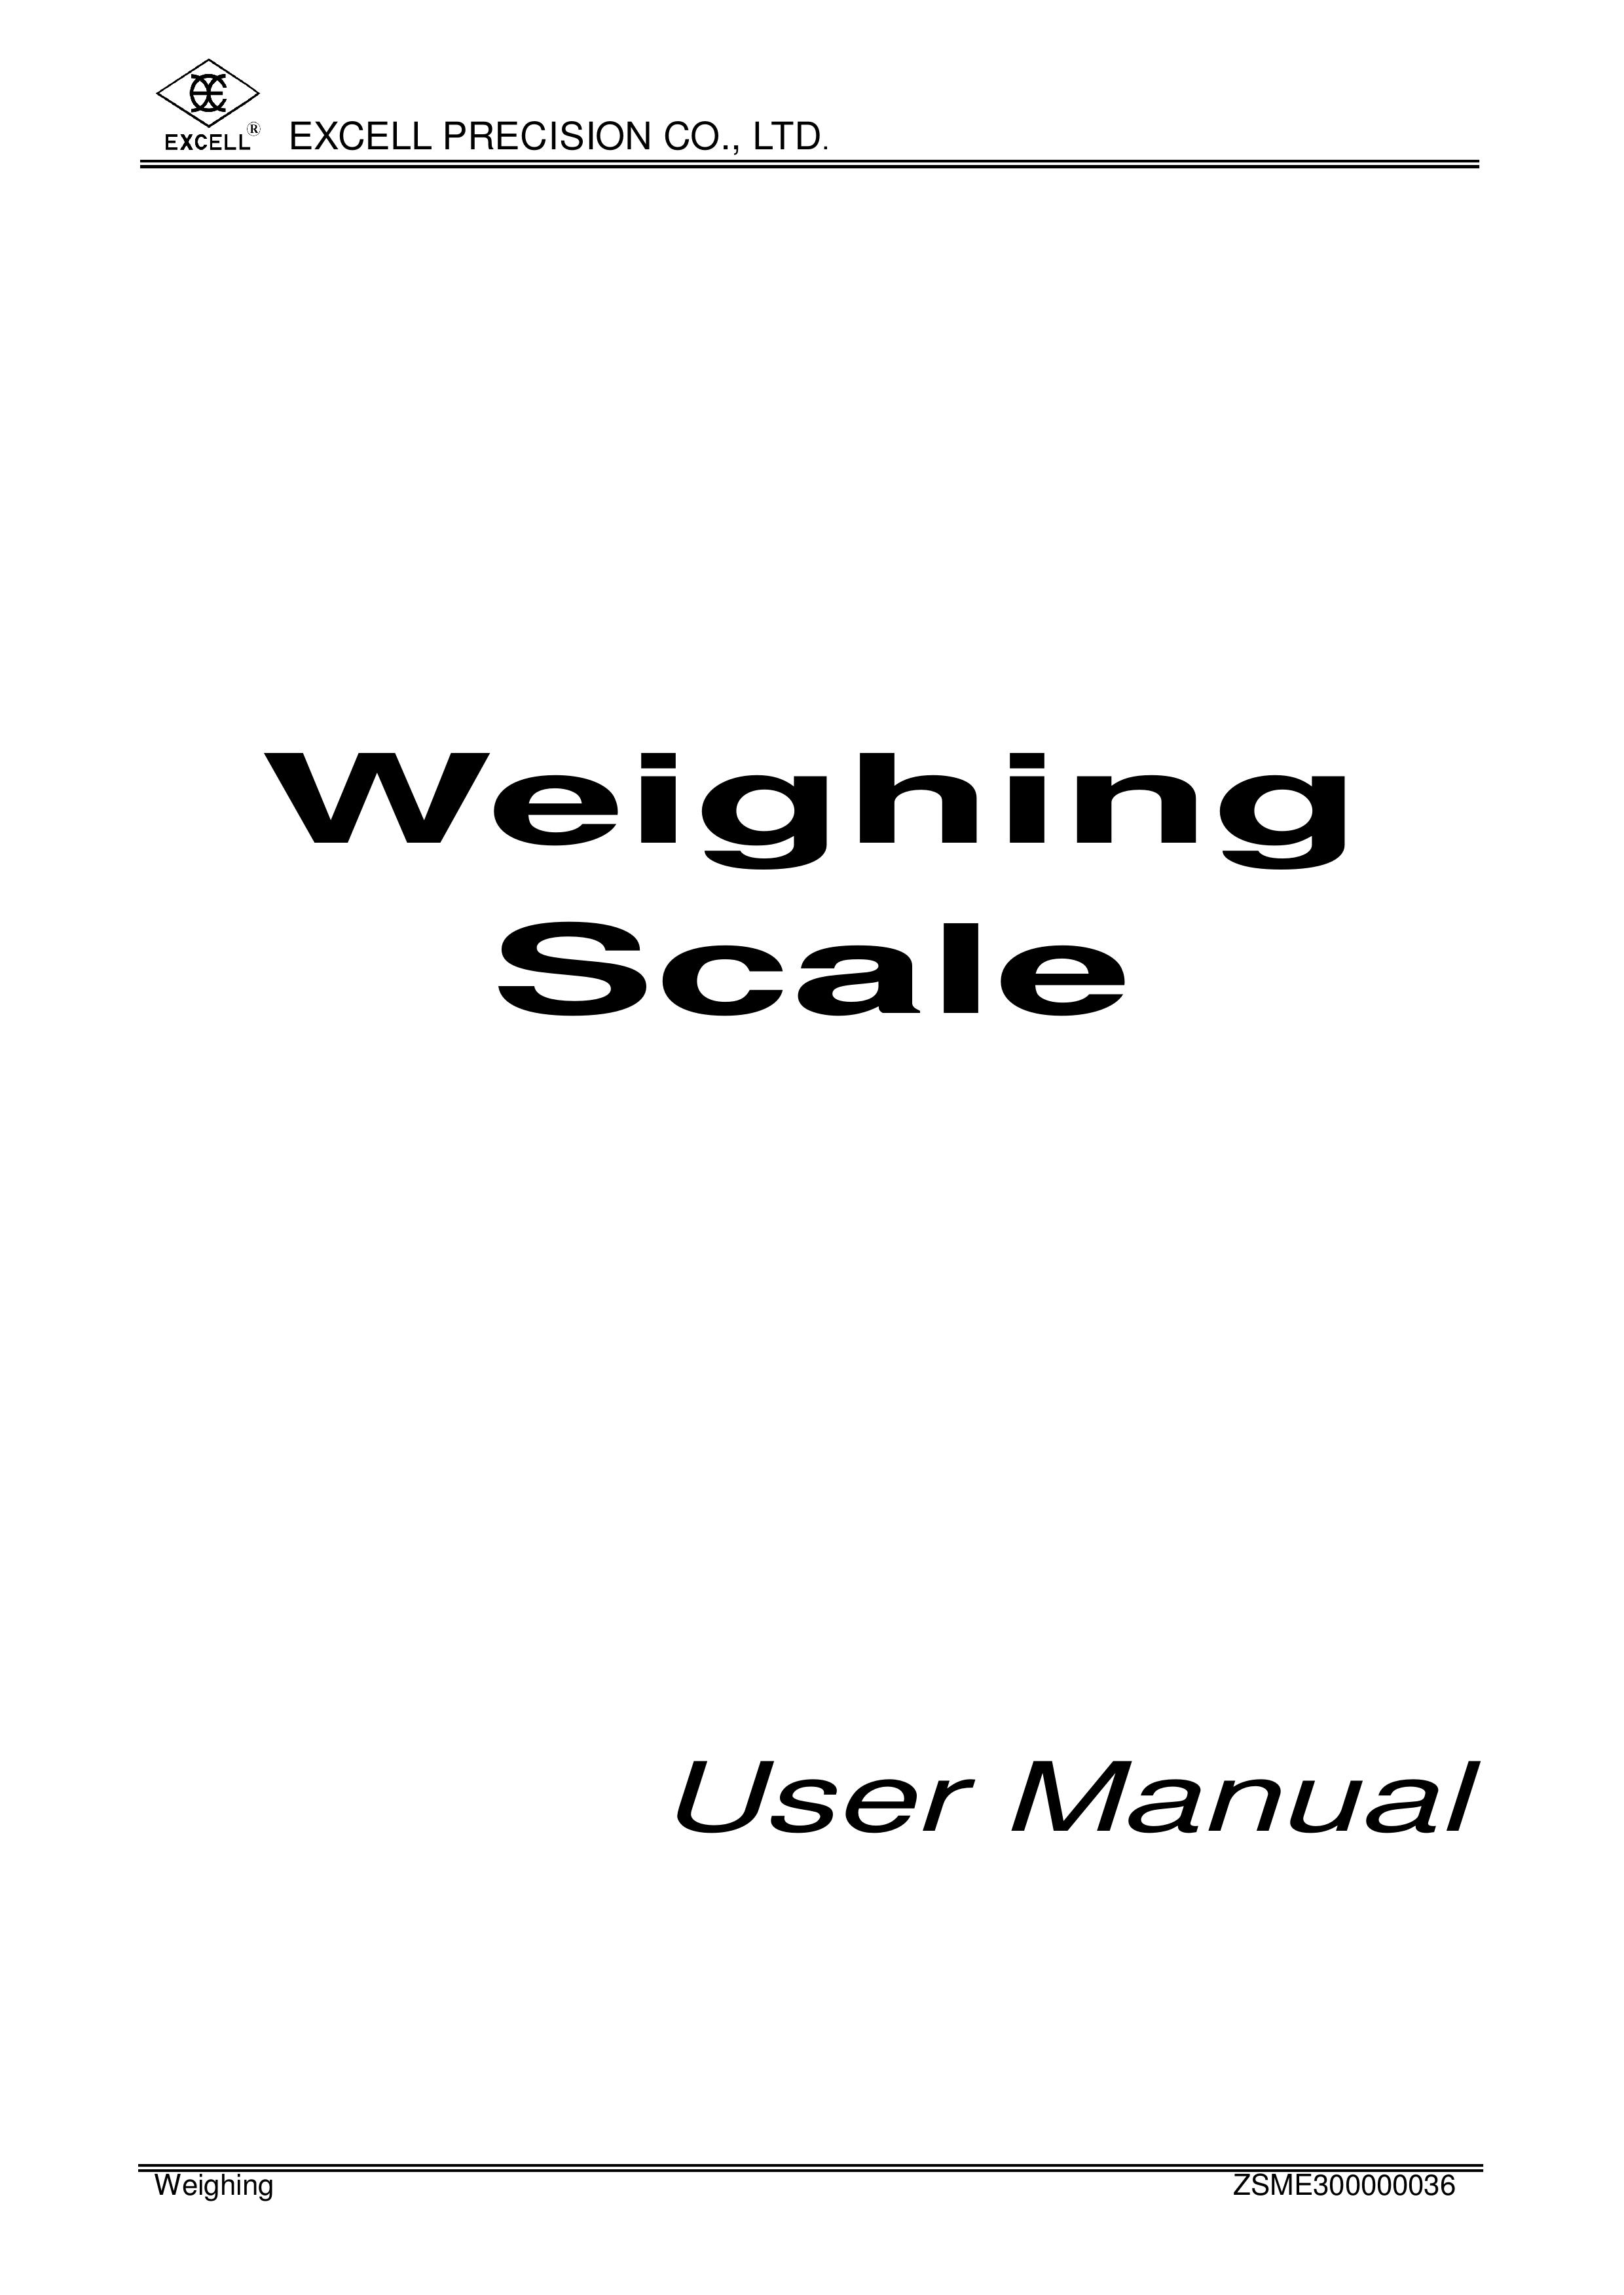 Excell Precision www.excell.com.tw/excell_en/uploads/product/200712... Scale User Manual